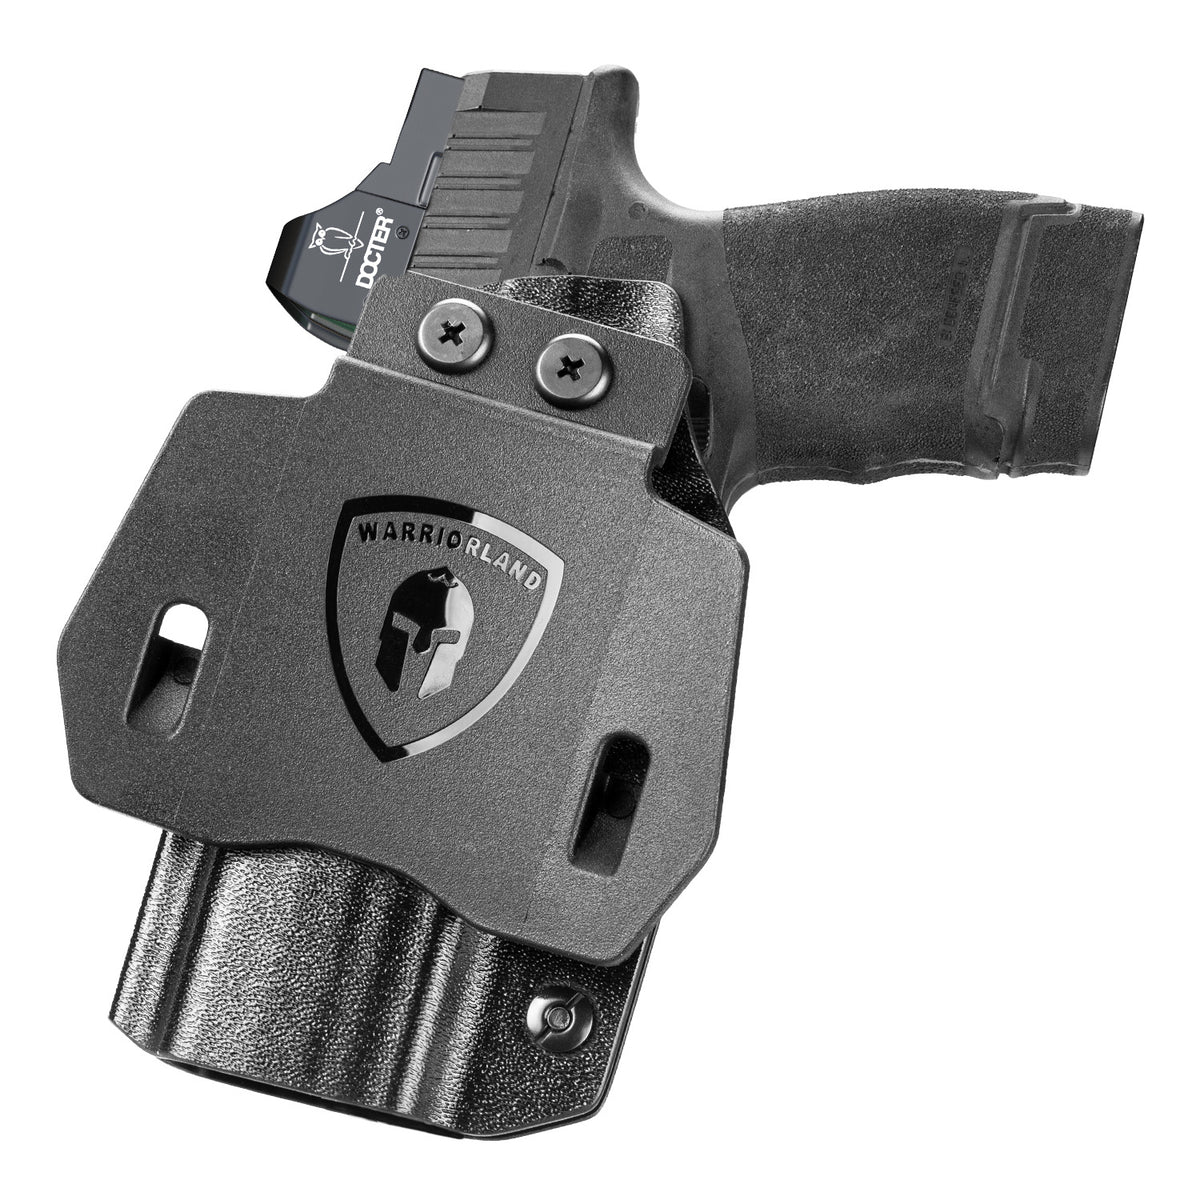 Hellcat Pro Holster OWB Kydex Holster Optics Cut: Springfield Armory Hellcat Pro & Hellcat Pro OSP Pistol, Outside Waistband Open Carry OSP Holster with 1.75 Inch Paddle, Adj. Retention & Cant, Right|WARRIORLAND